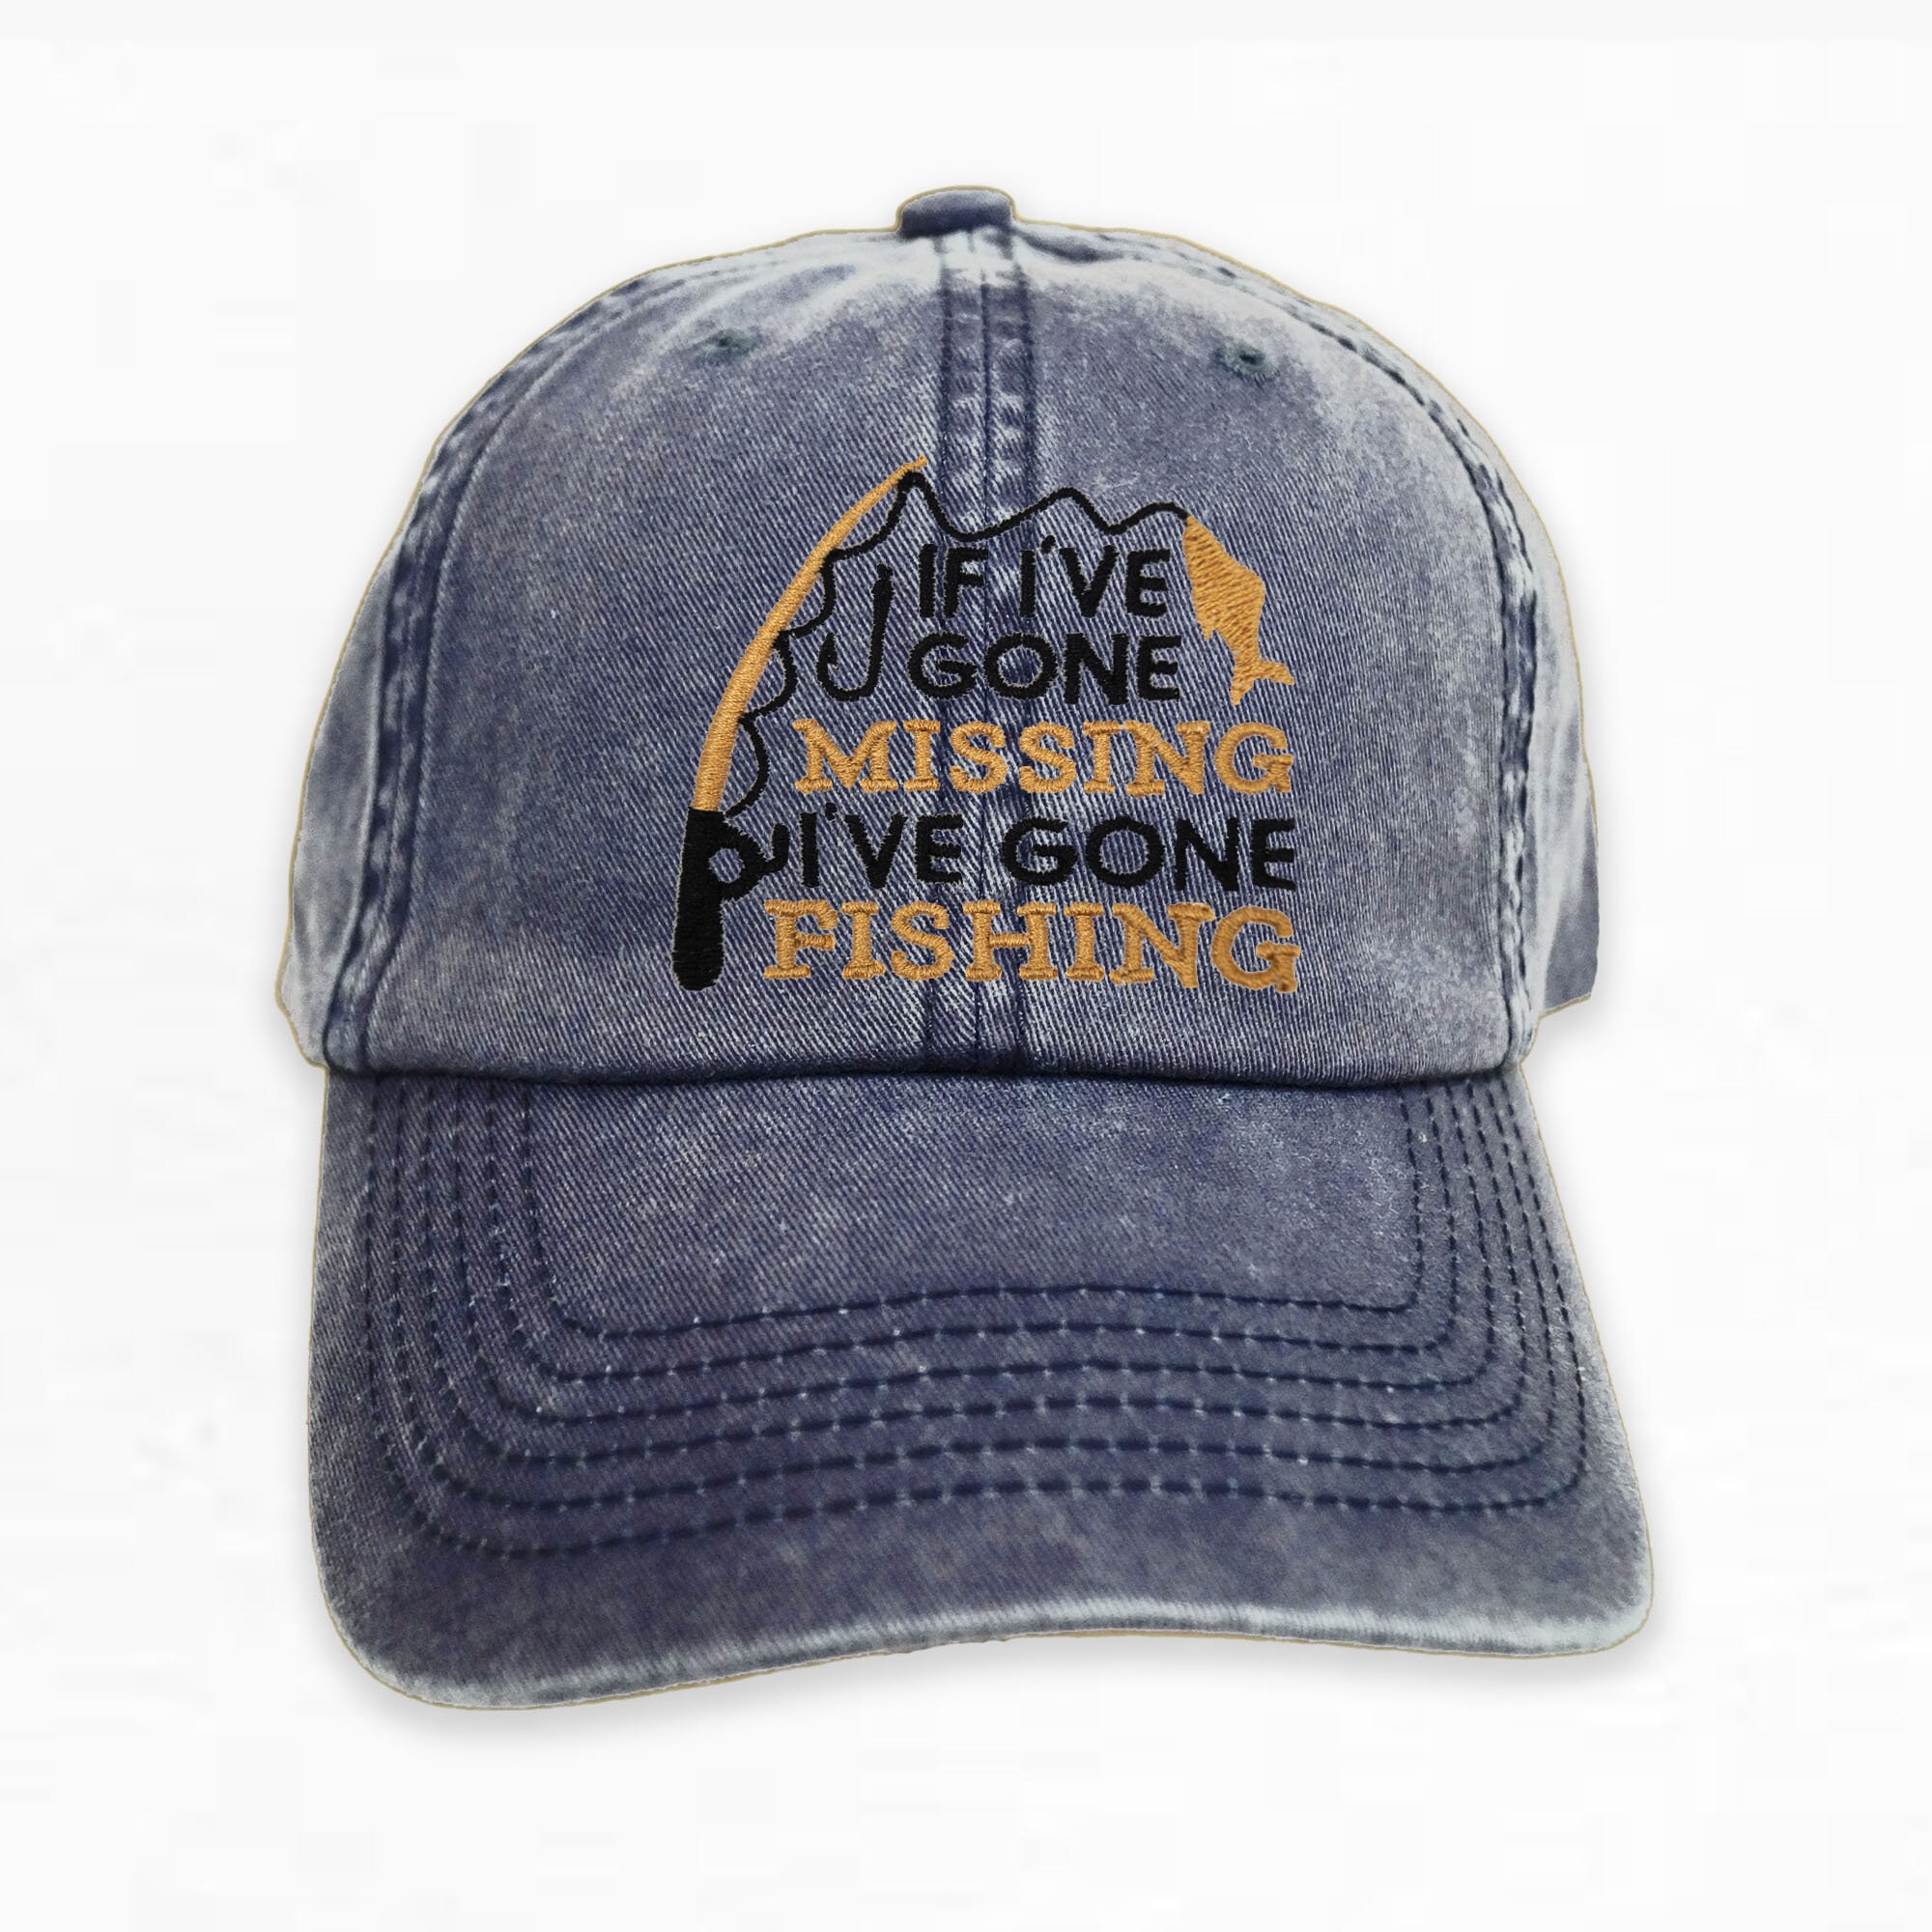 Gone Fishing Hat, Personalized Hat Fishing design, Soft Structure